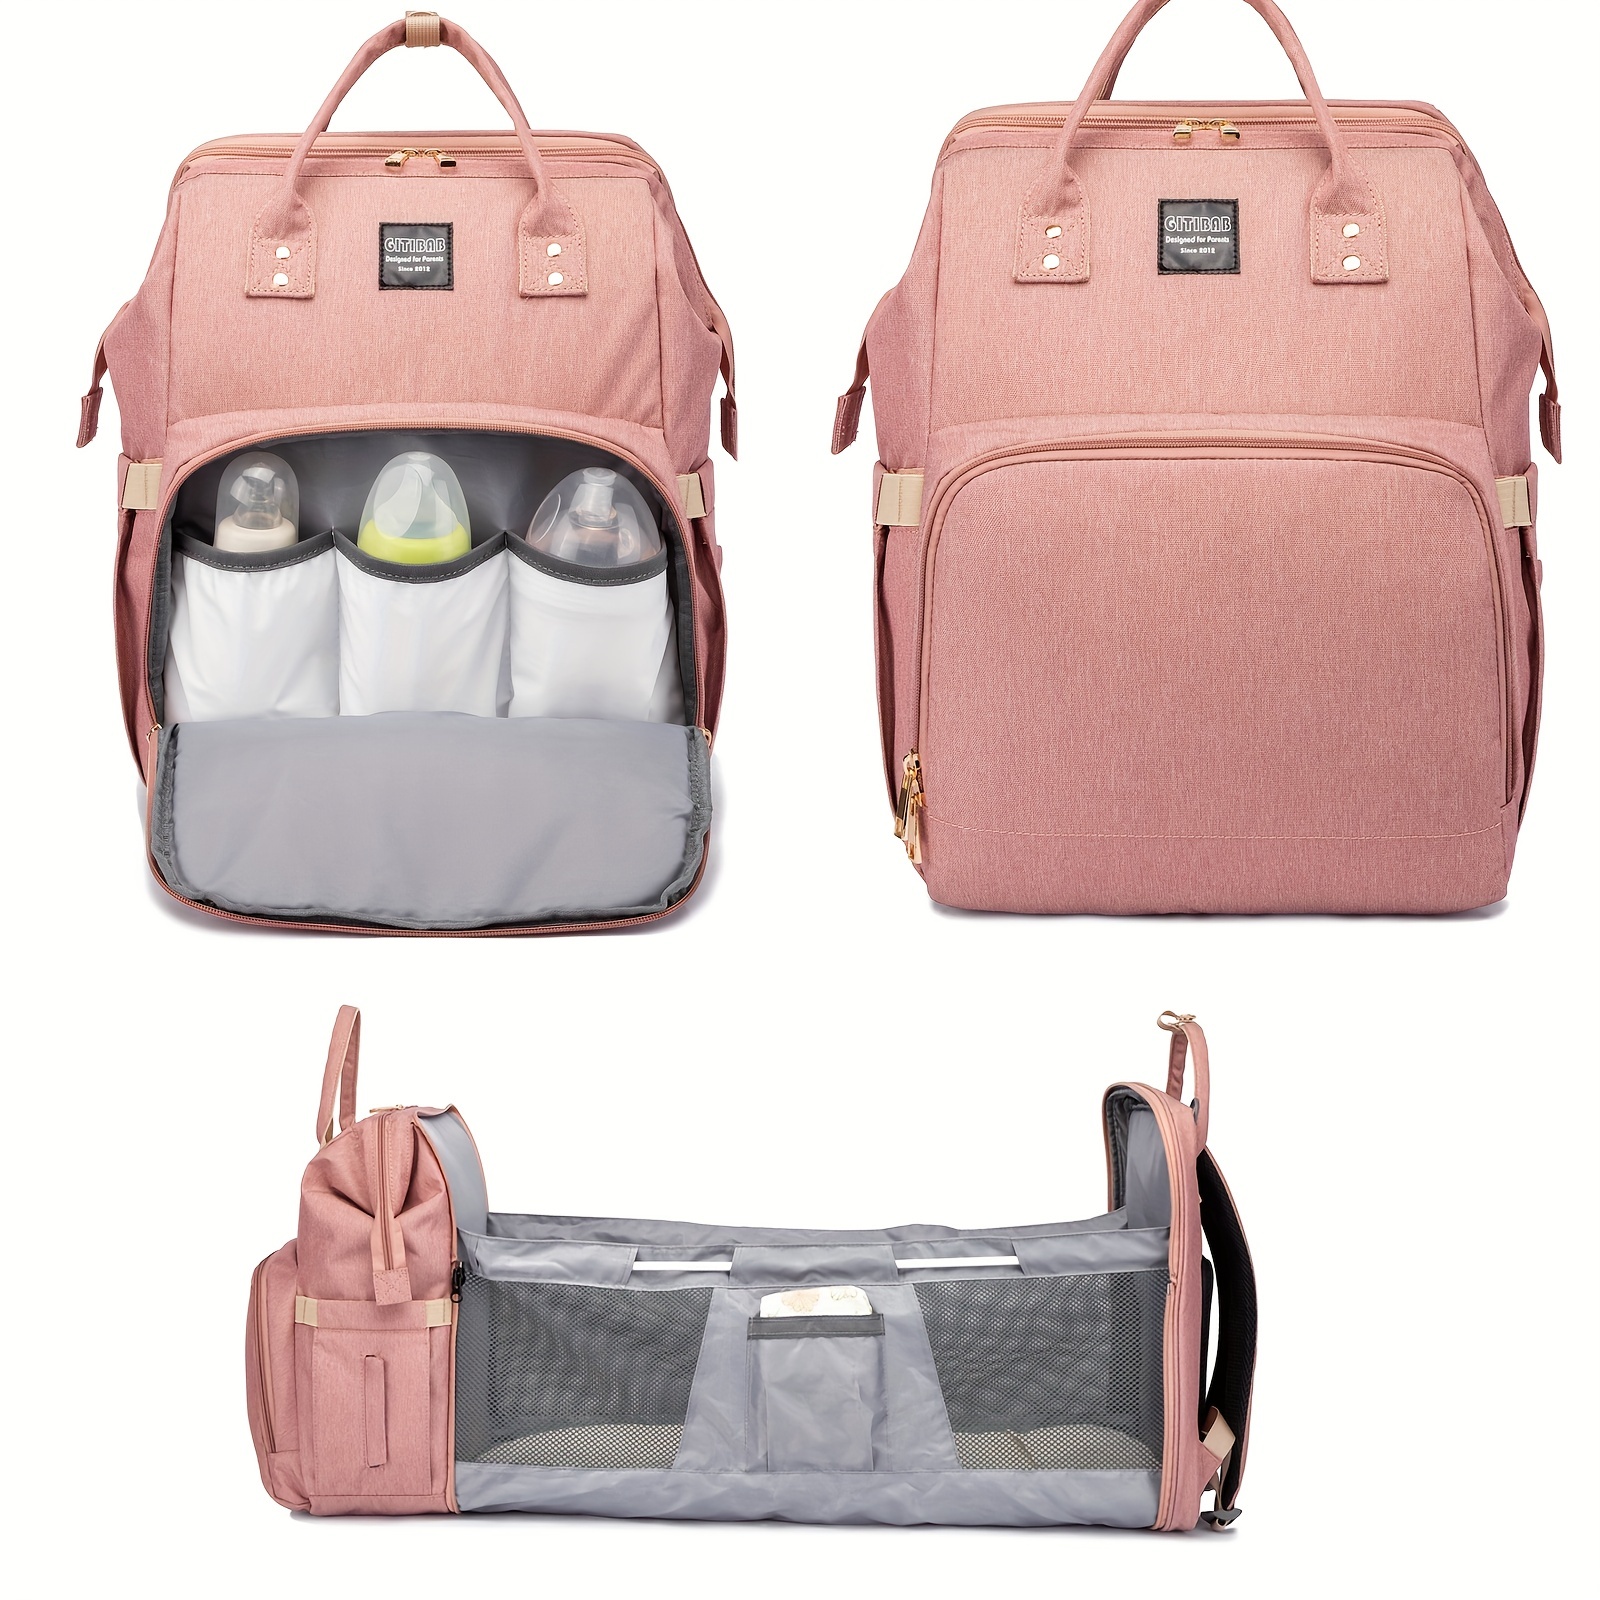 Large Capacity Baby Diaper Bag for Going Out